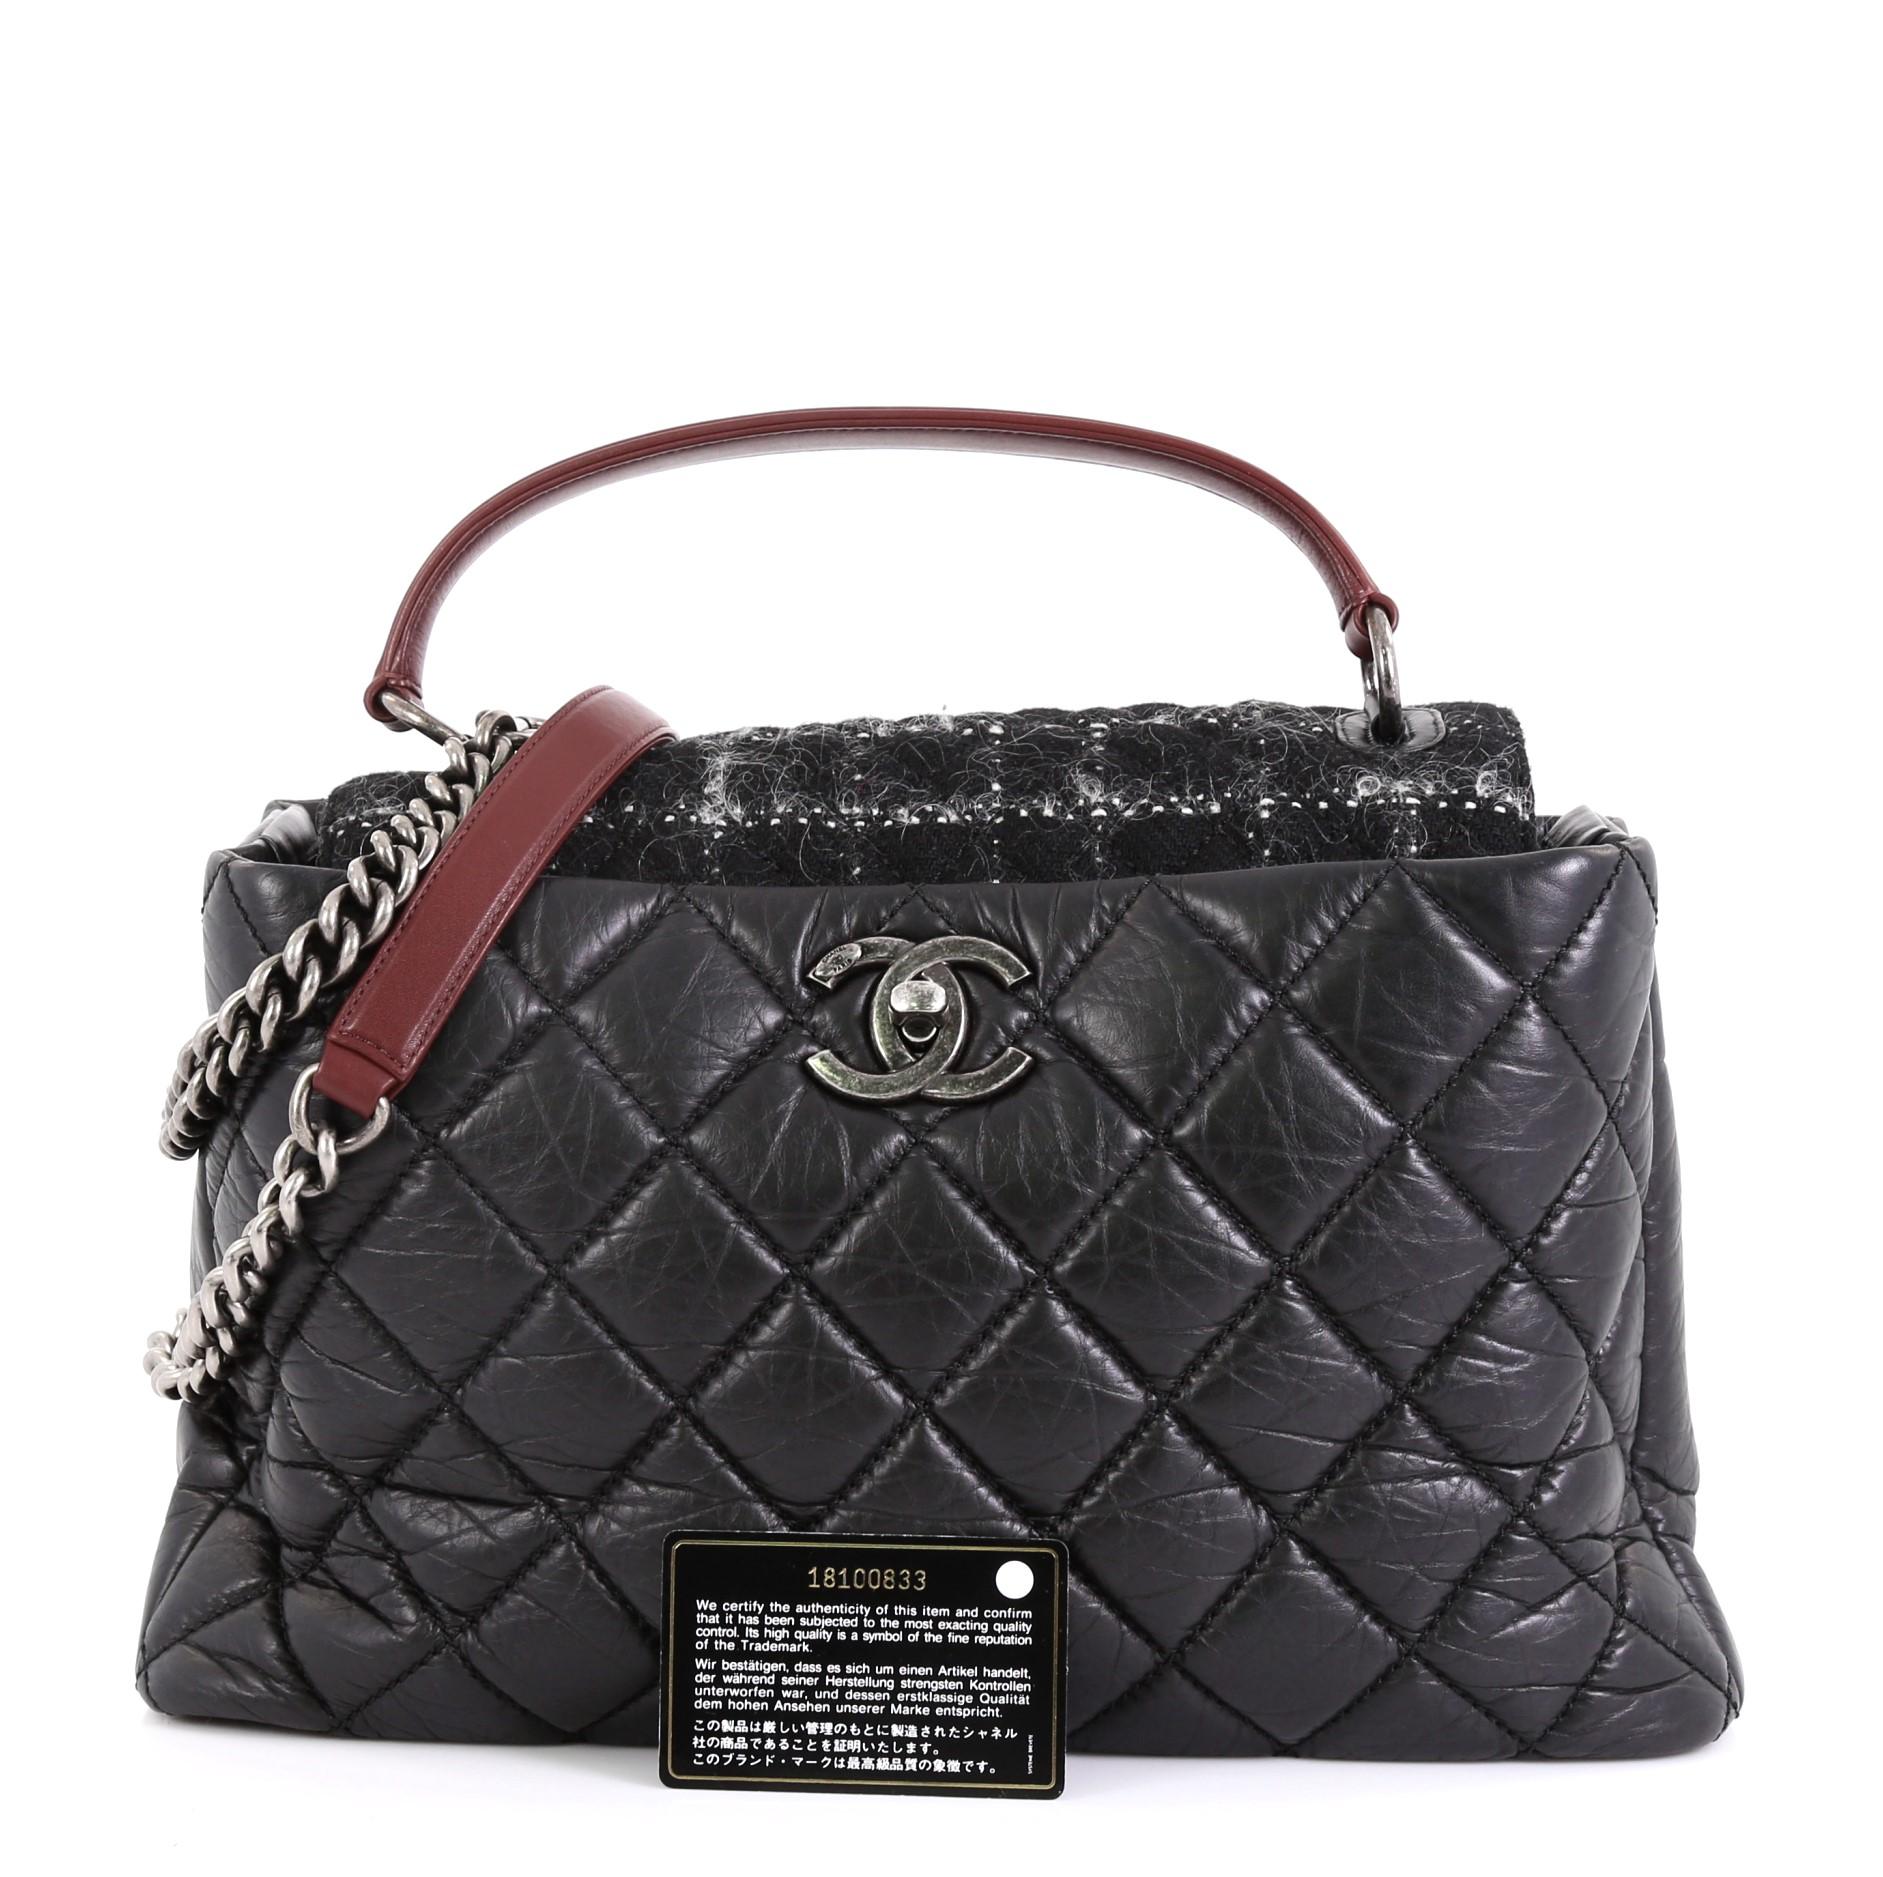 This Chanel Portobello Top Handle Bag Quilted Aged Calfskin and Tweed Large, crafted from black quilted aged calfskin leather and tweed, features flat leather top handle and aged silver-tone hardware. Its CC turn-lock closure opens to a red fabric